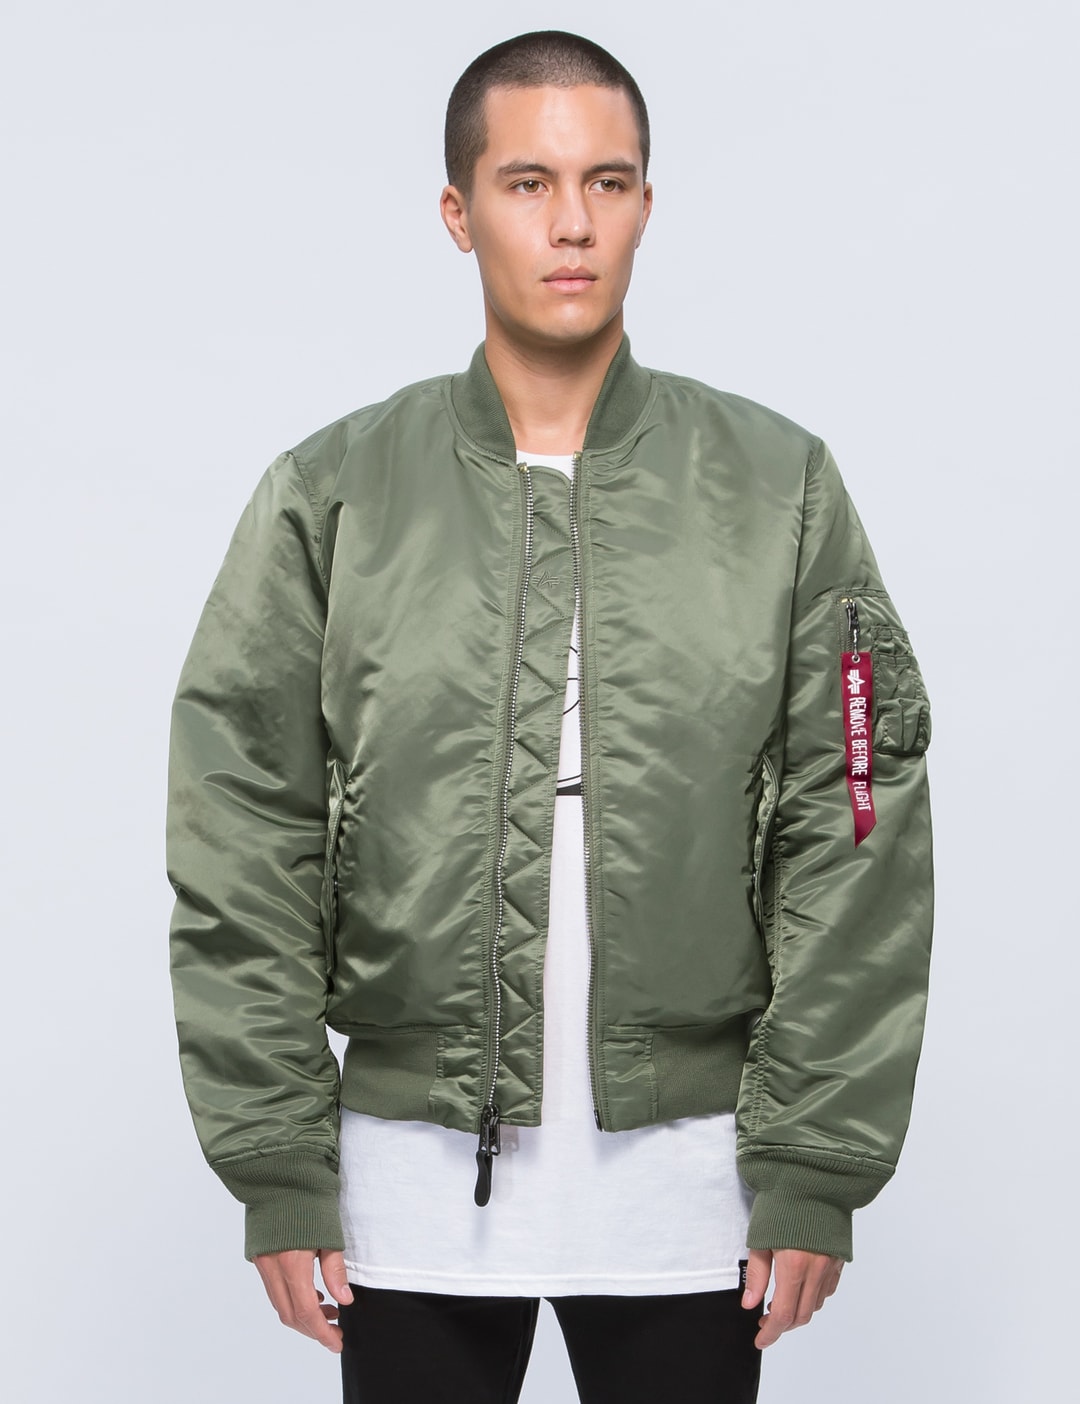 Alpha Industries - Slim Fit Jacket | HBX - Globally Curated Fashion and Lifestyle by Hypebeast